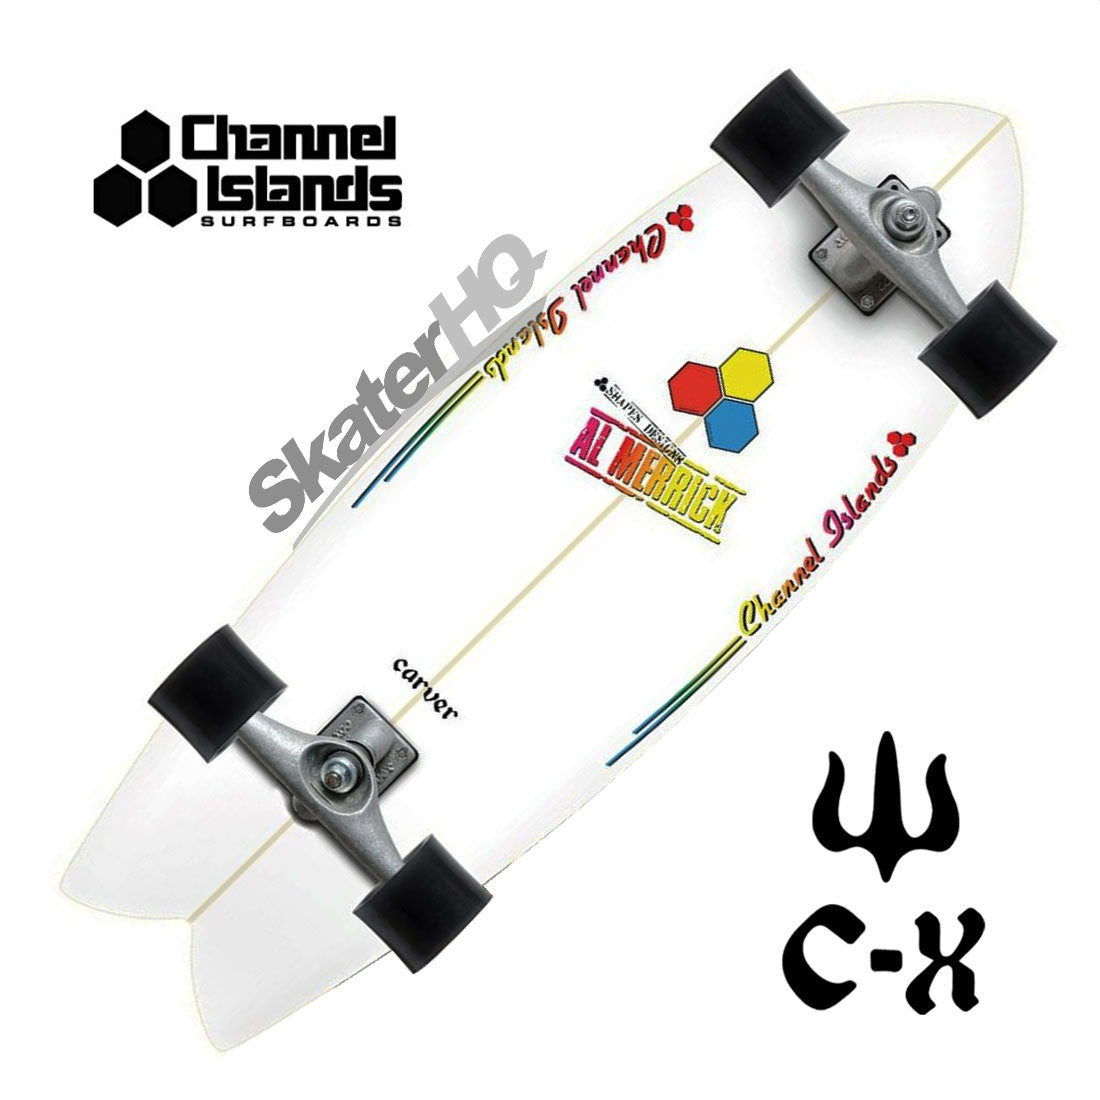 Carver Channel Islands Fishbeard CX Raw Complete Skateboard Compl Carving and Specialty